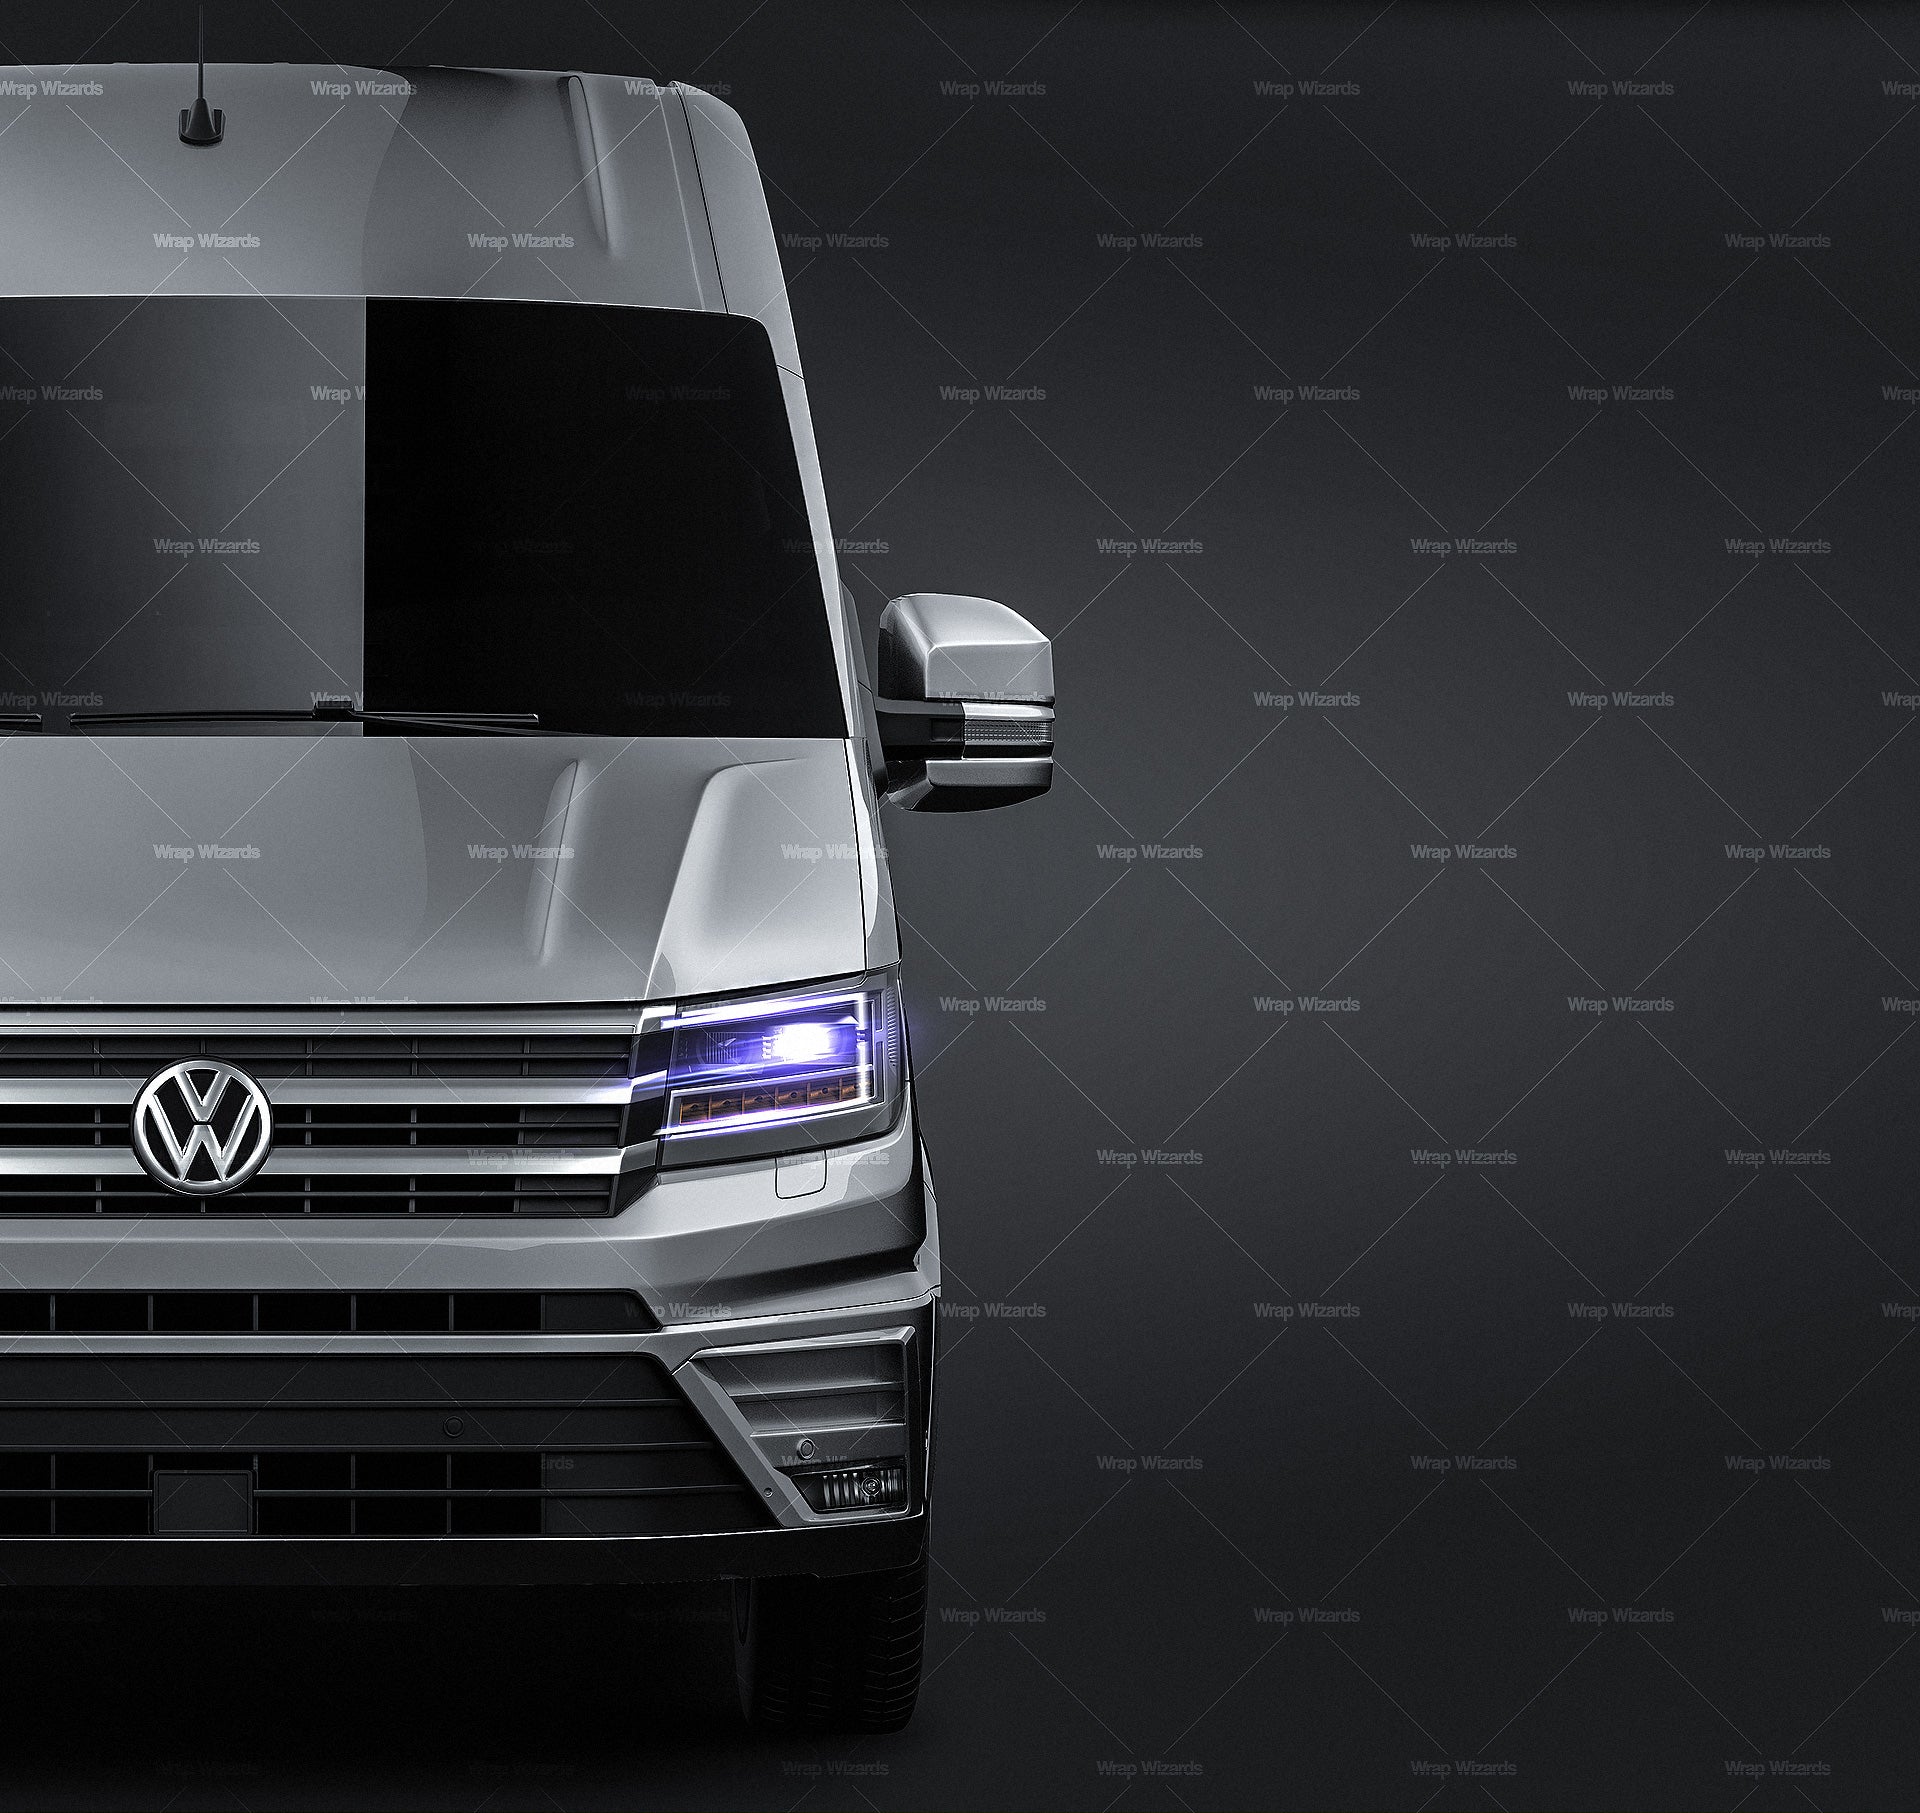 Volkswagen Crafter Medium High Roof L1H2 2019 glossy finish - all sides Car Mockup Template.psd